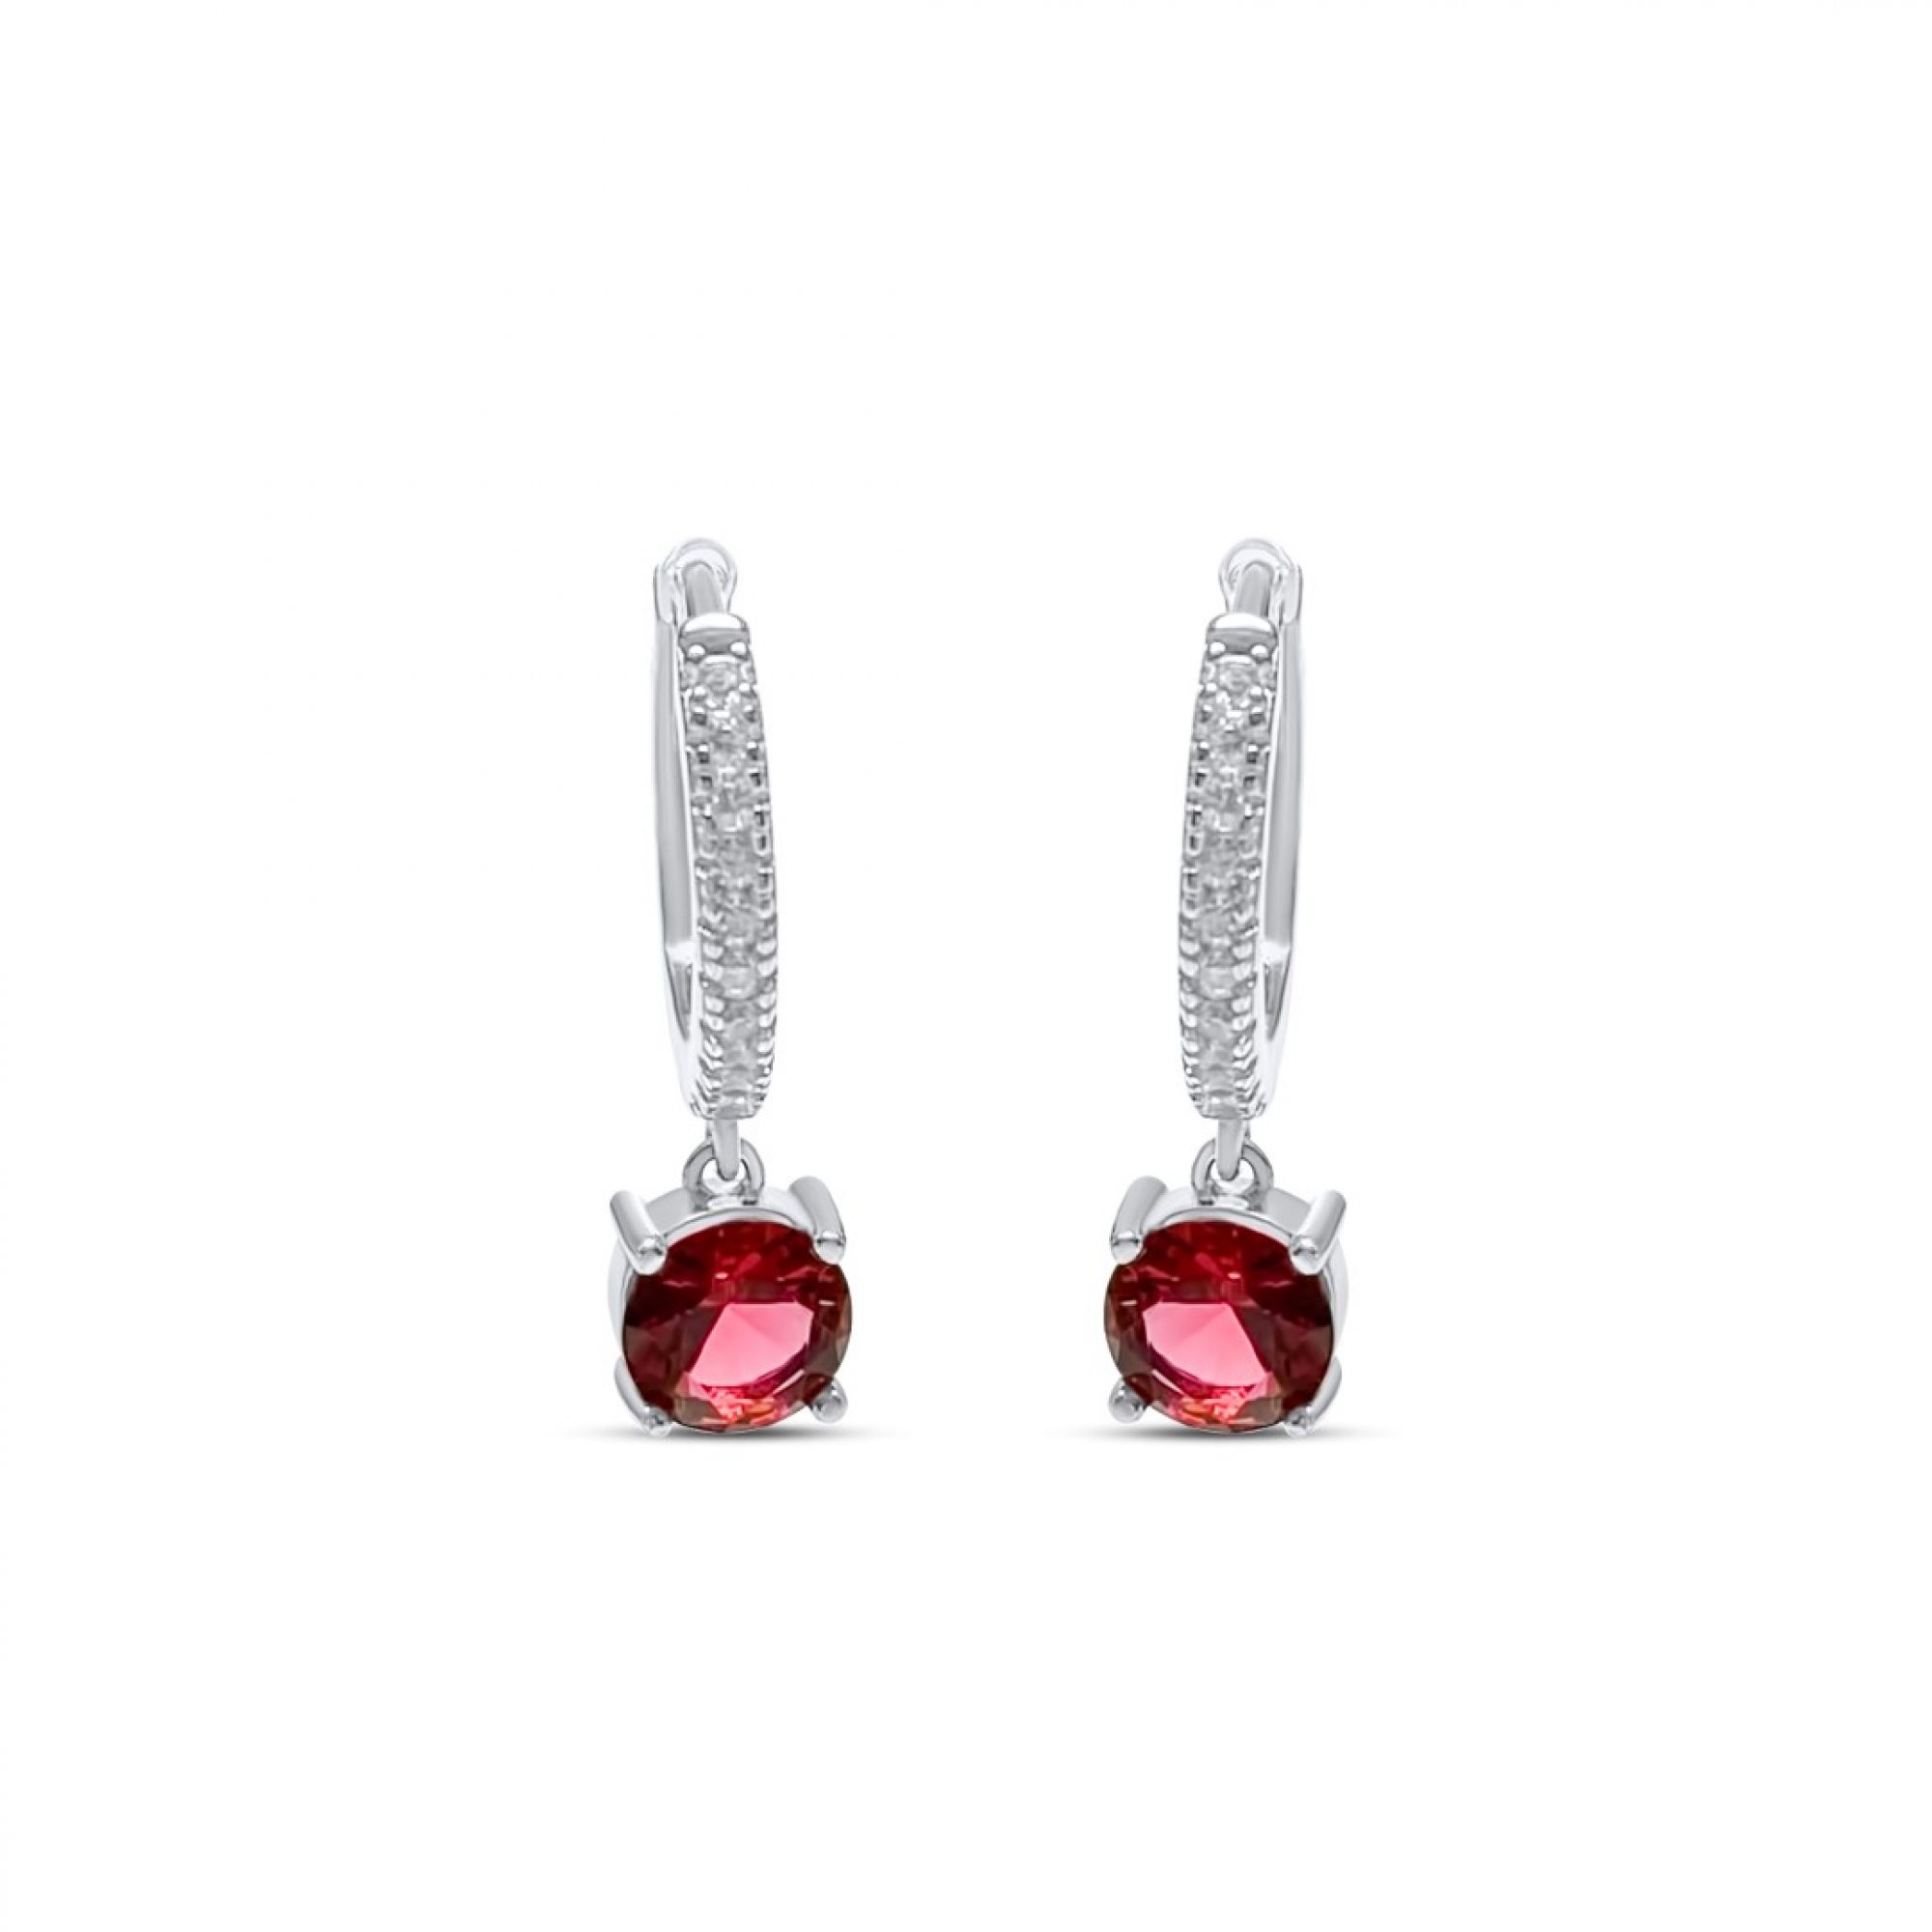 Silver earrings with ruby and zircon stones